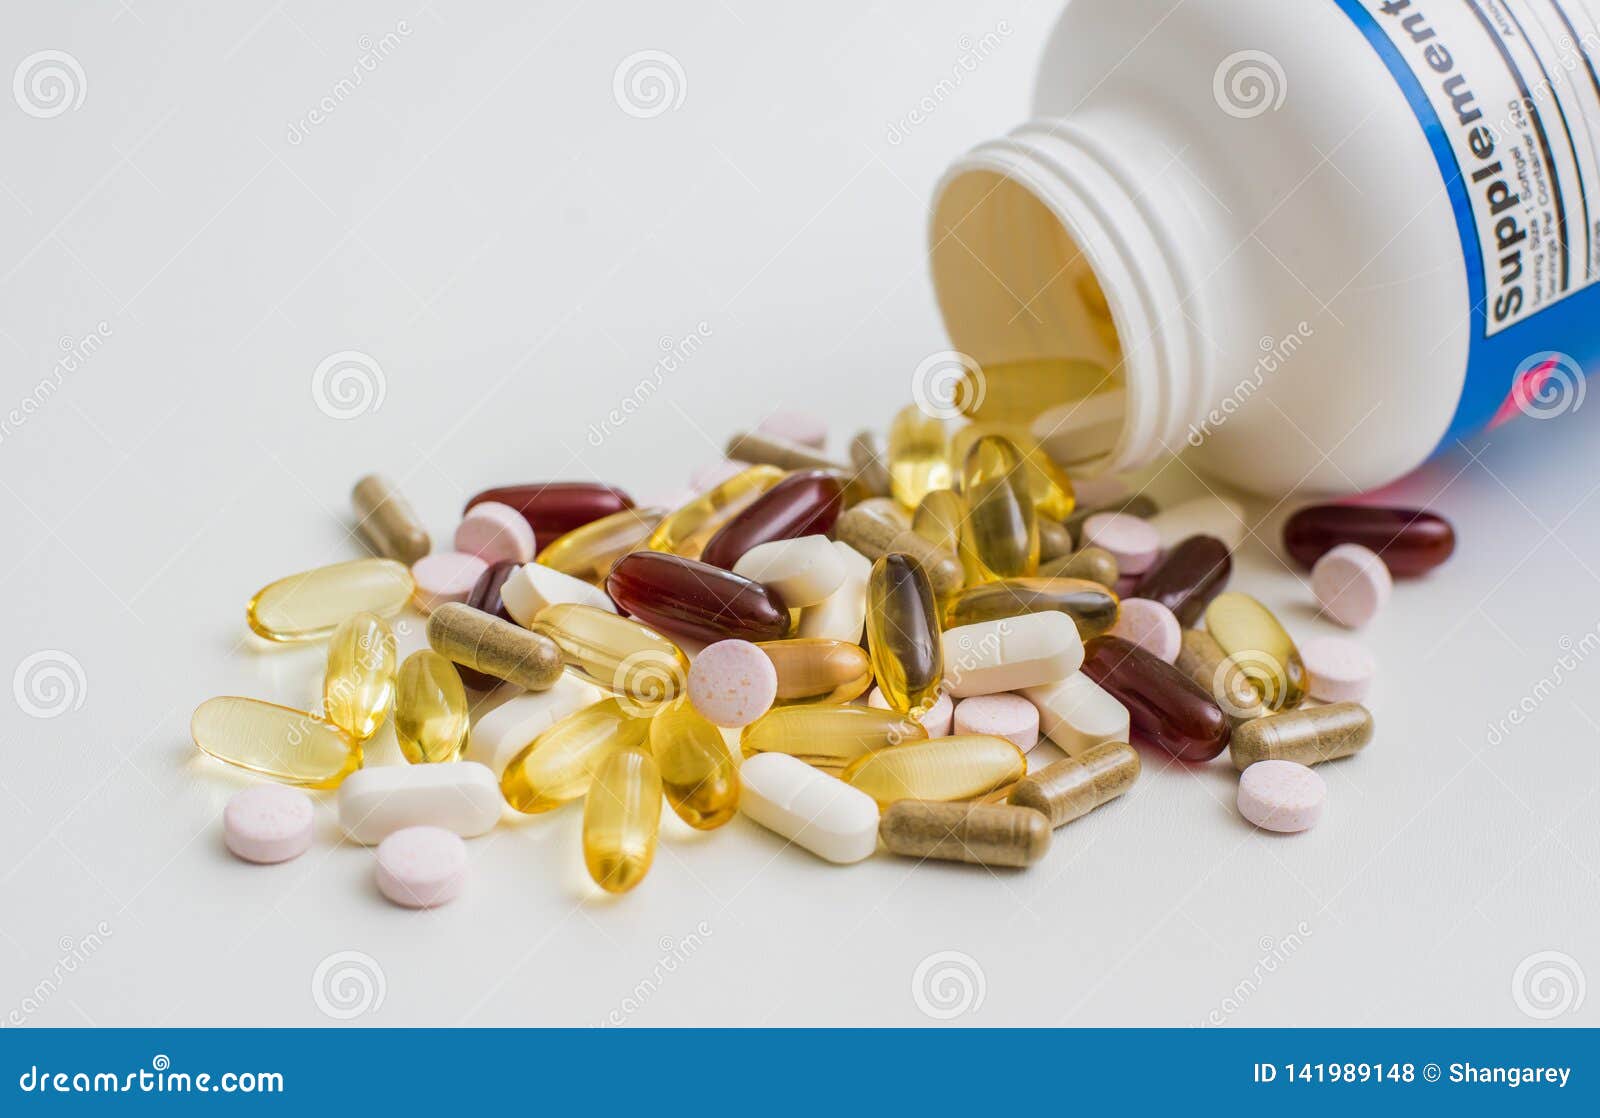 vitamins, omega 3, cod-liver oil, dietary supplement and tablets